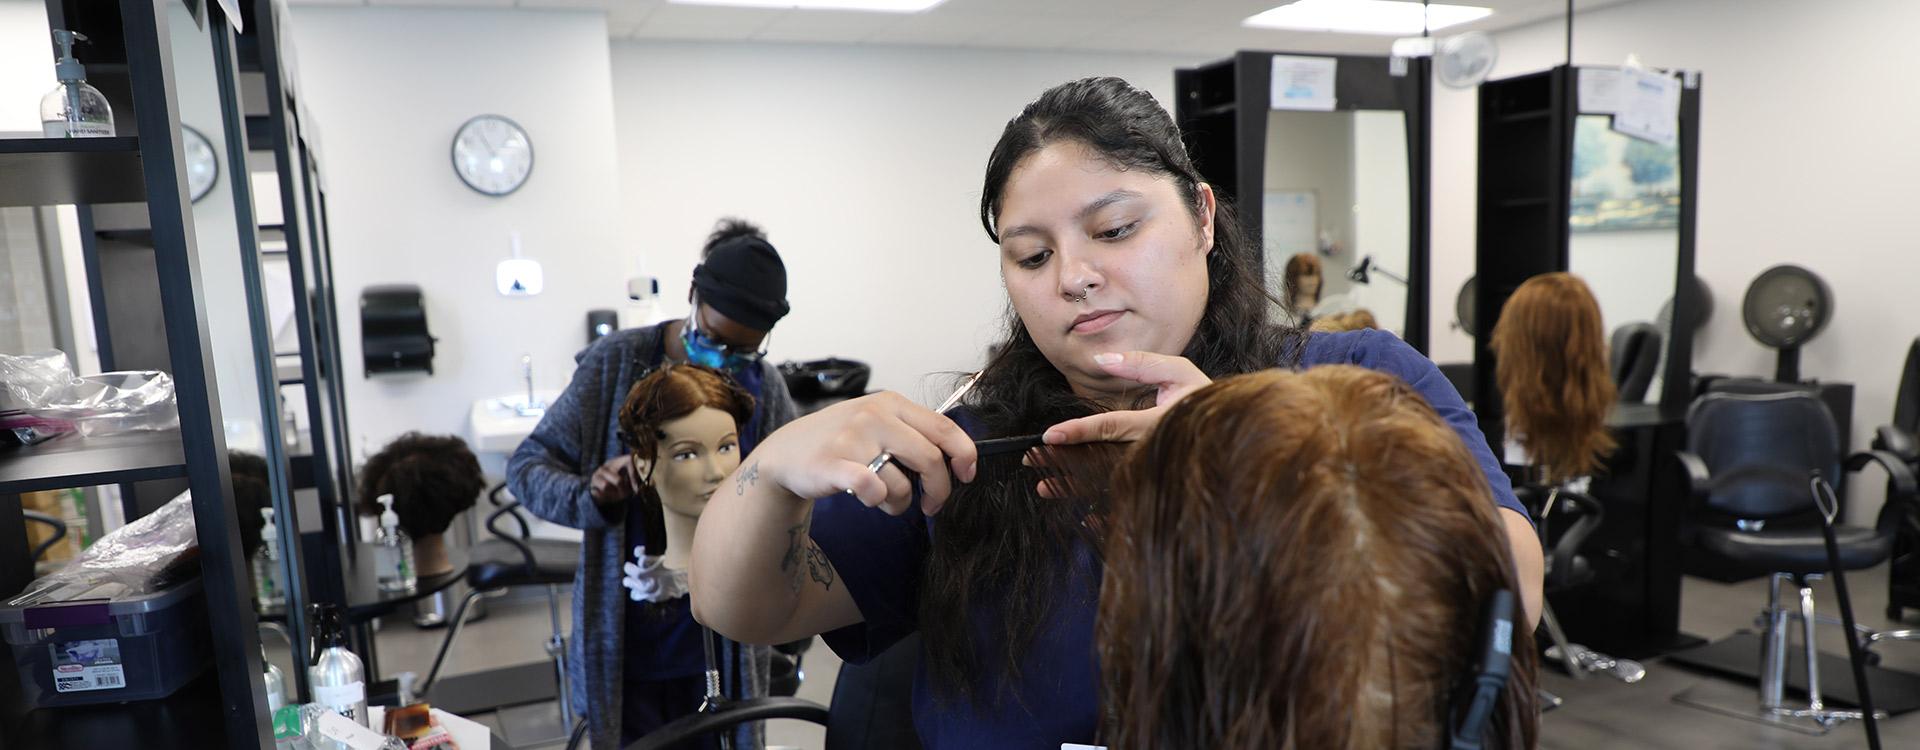 cosmetology students practice cutting hair on dummies in a hair studio